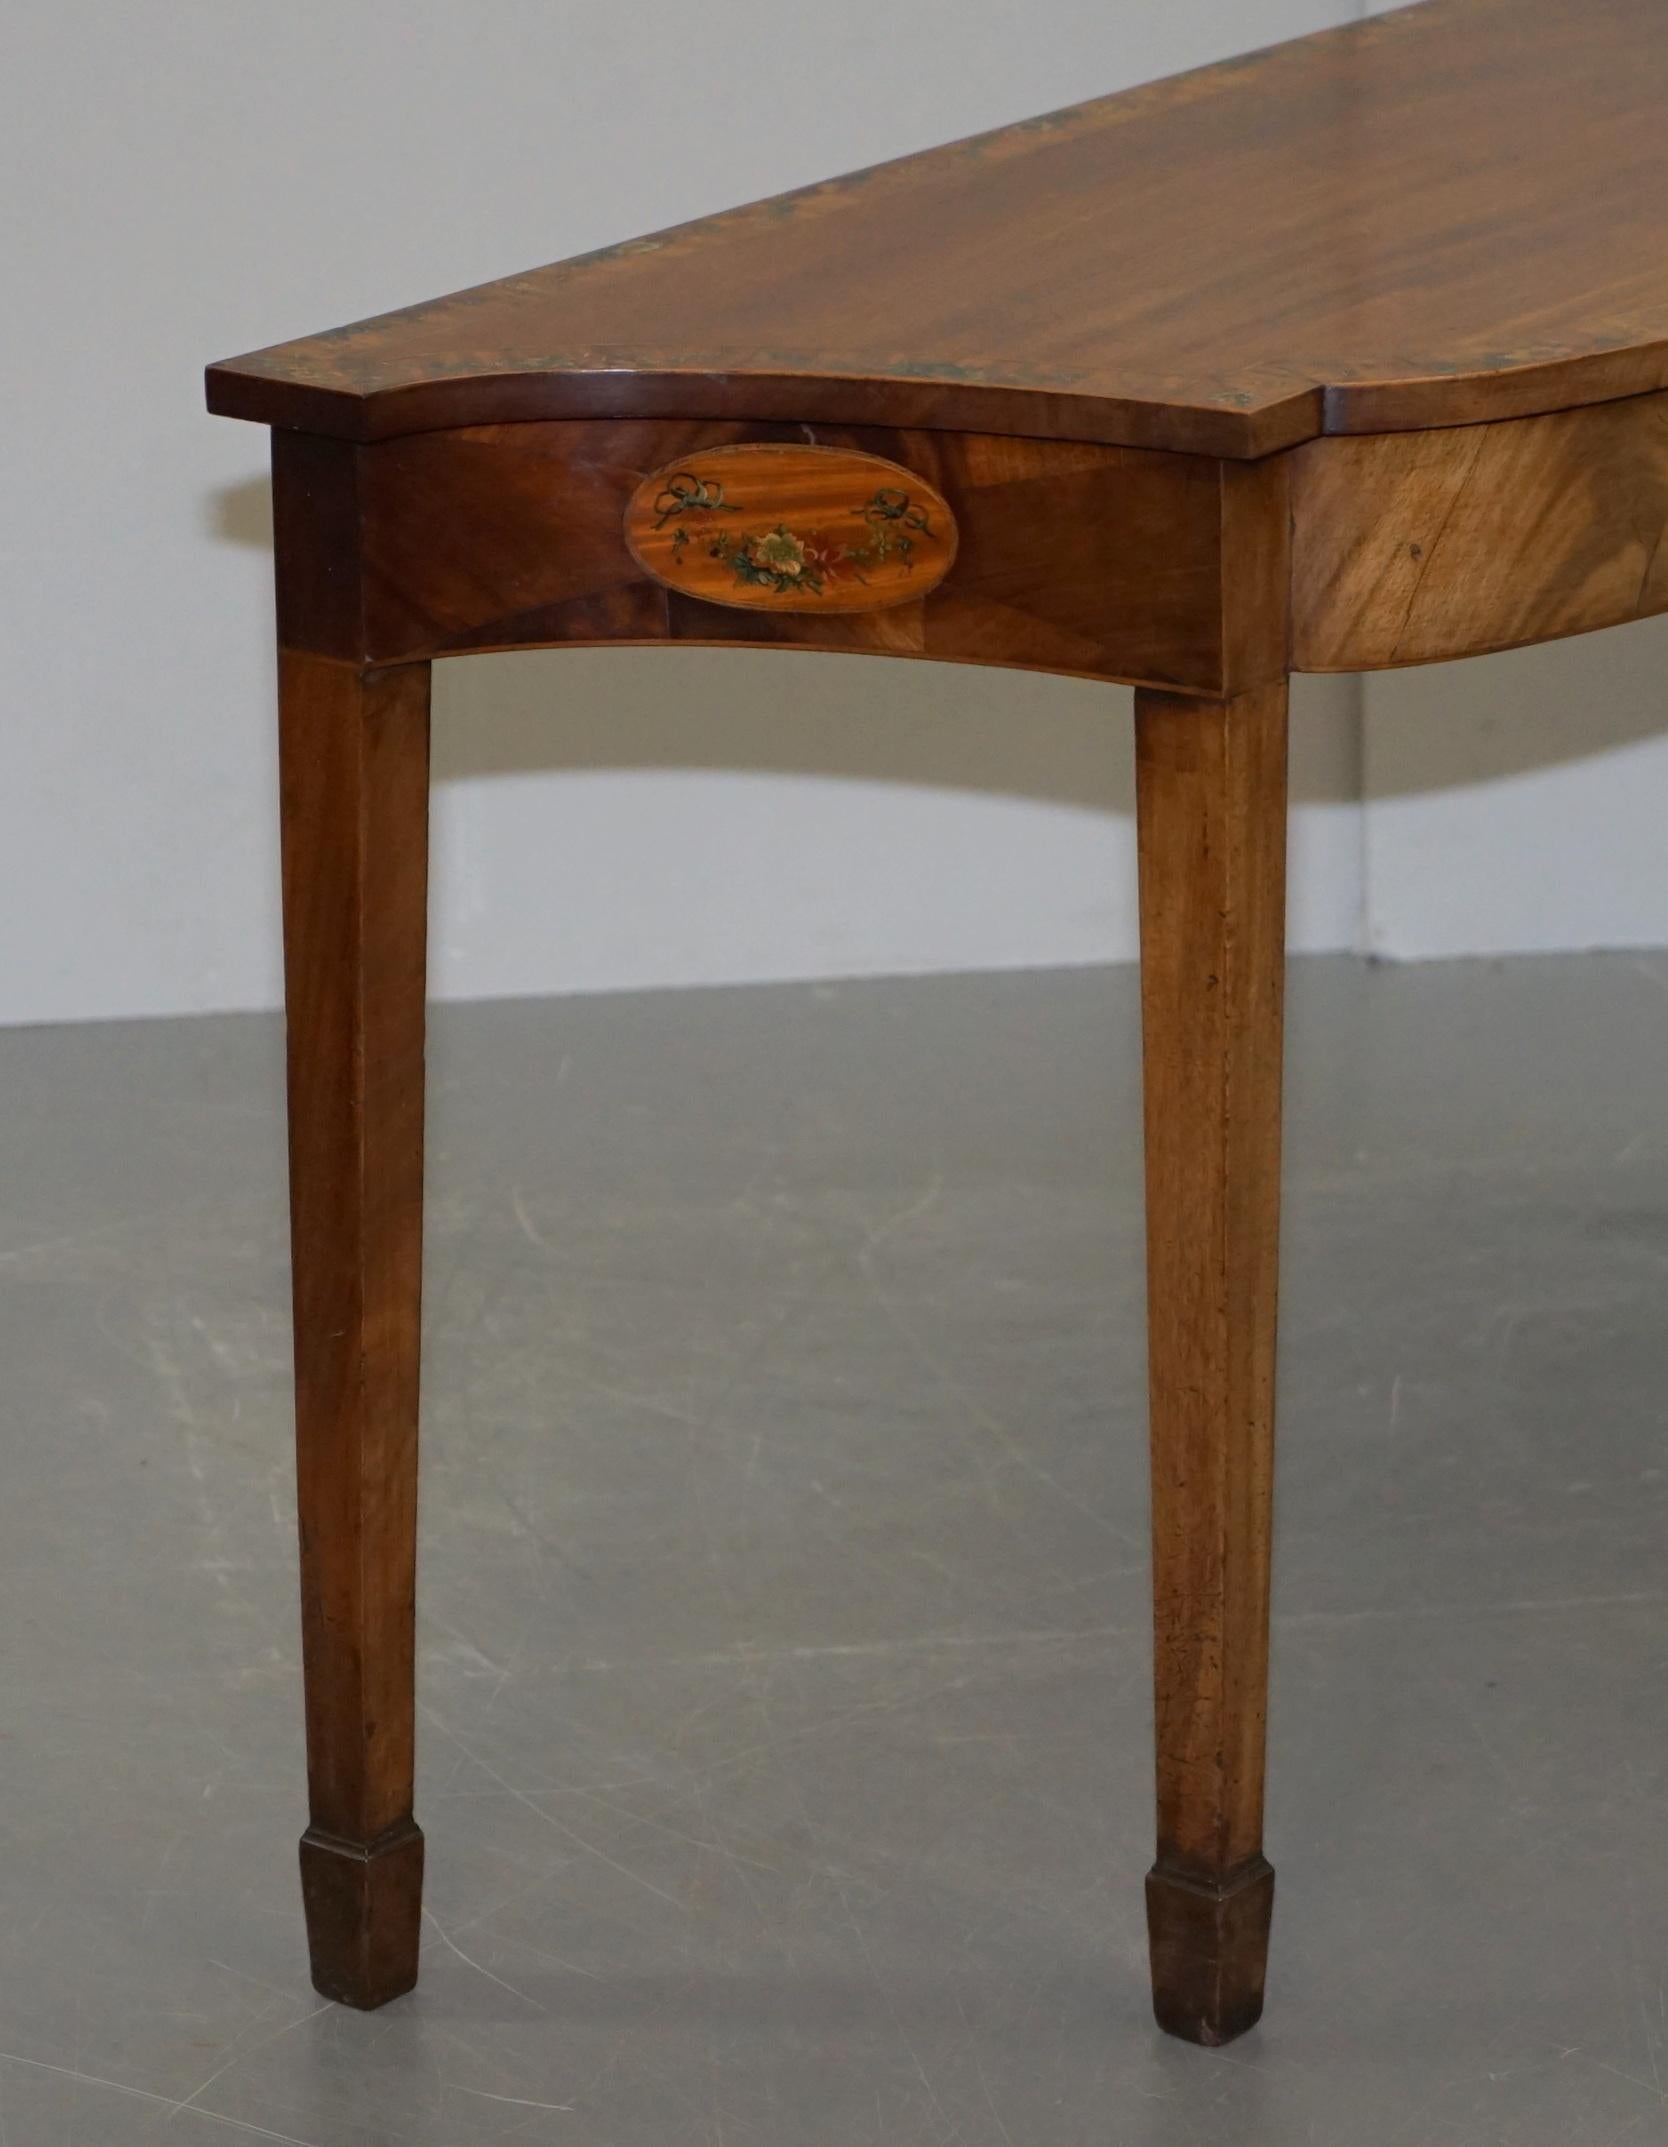 Pair of George III 1780 Satinwood & Tulip Wood Polychrome Painted Console Tables For Sale 5